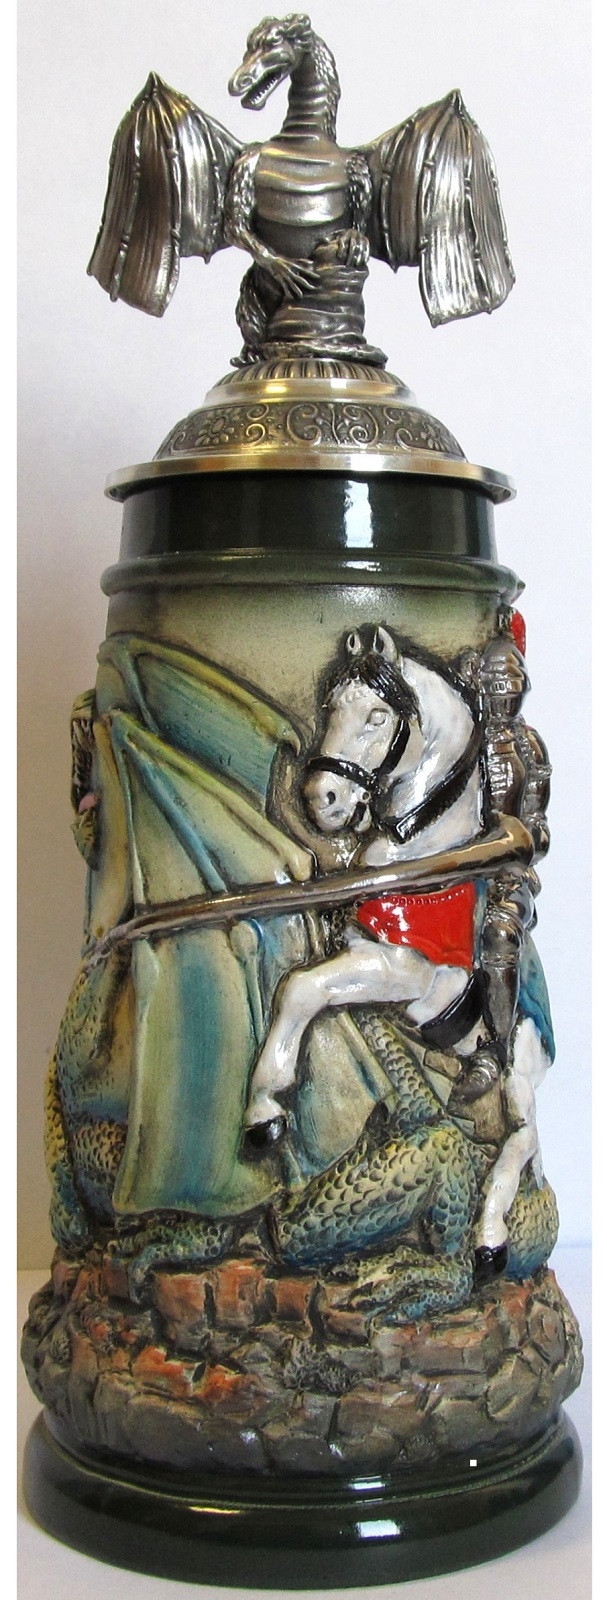 Rustic Medieval Knight Fighting Dragon with Dragon Lid LE German Beer